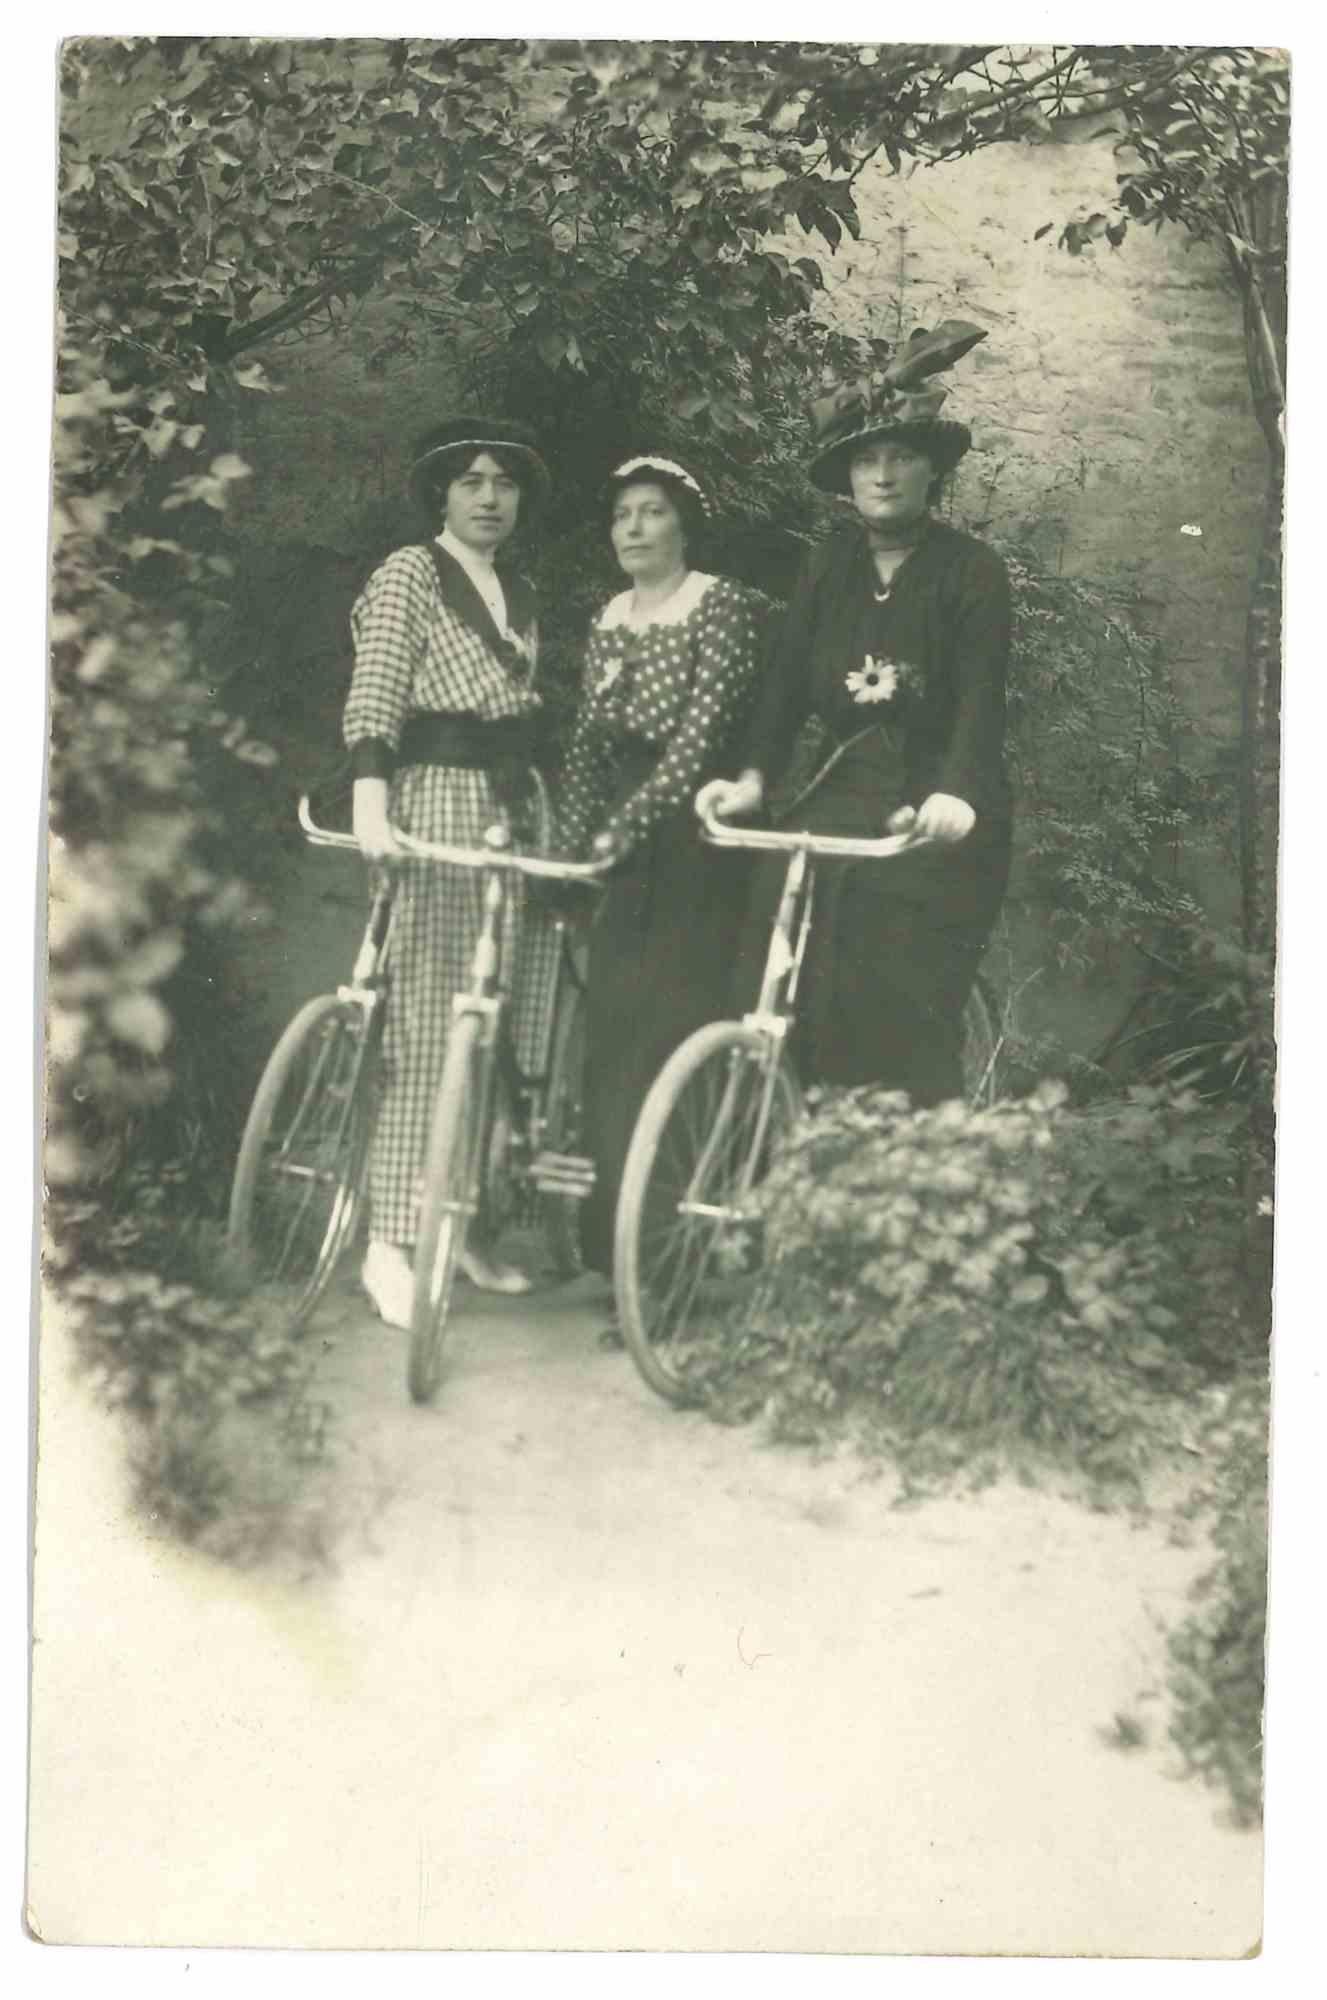 Women with Bikes - The Old Days - Early 20th Century